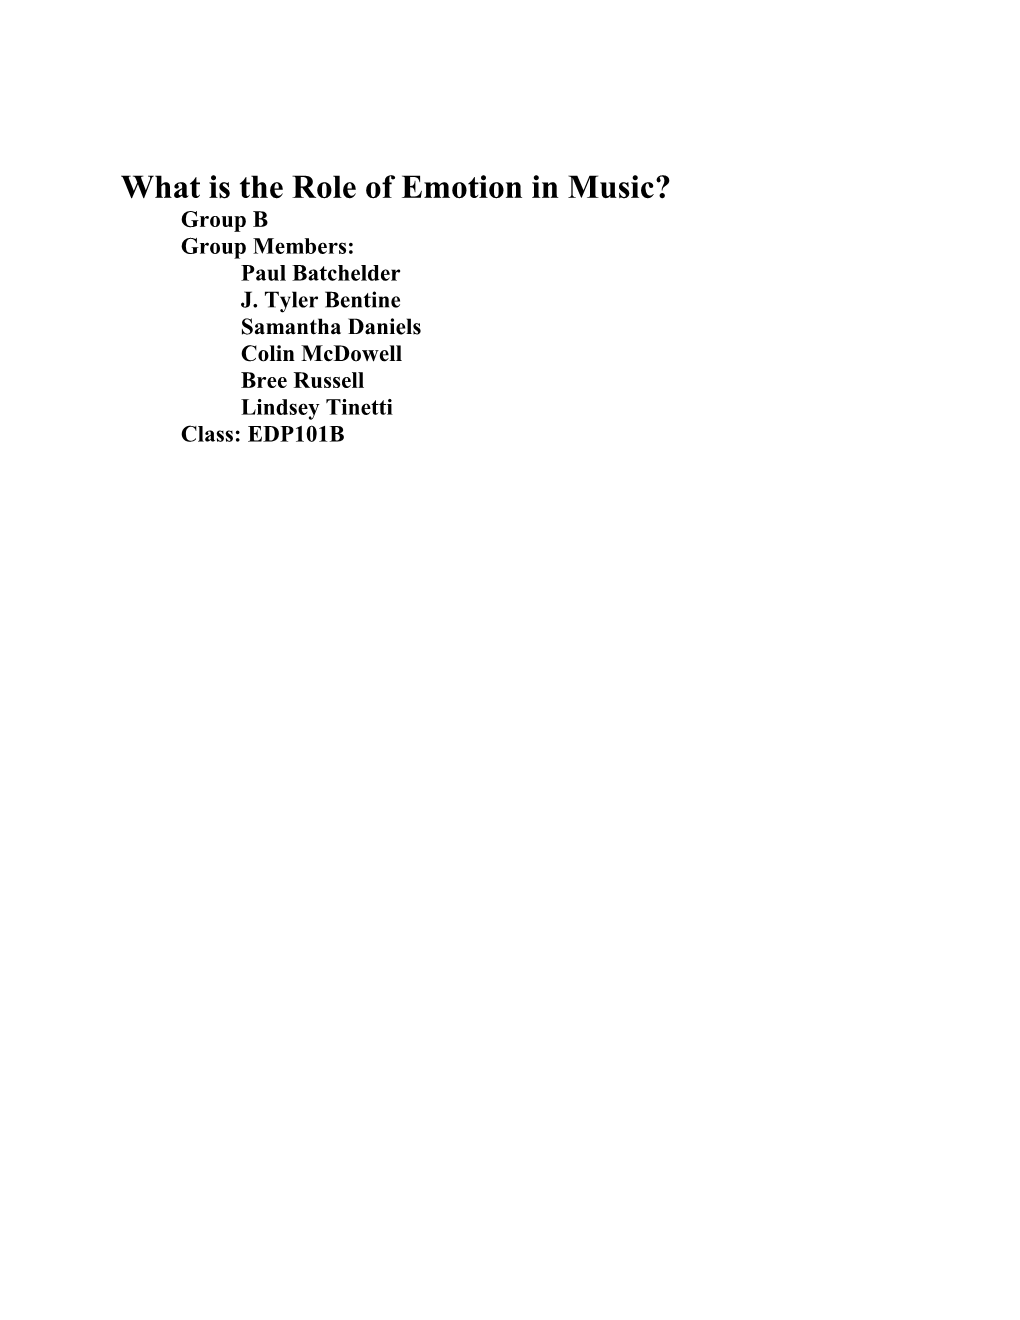 Title: What Is the Role of Emotion in Music